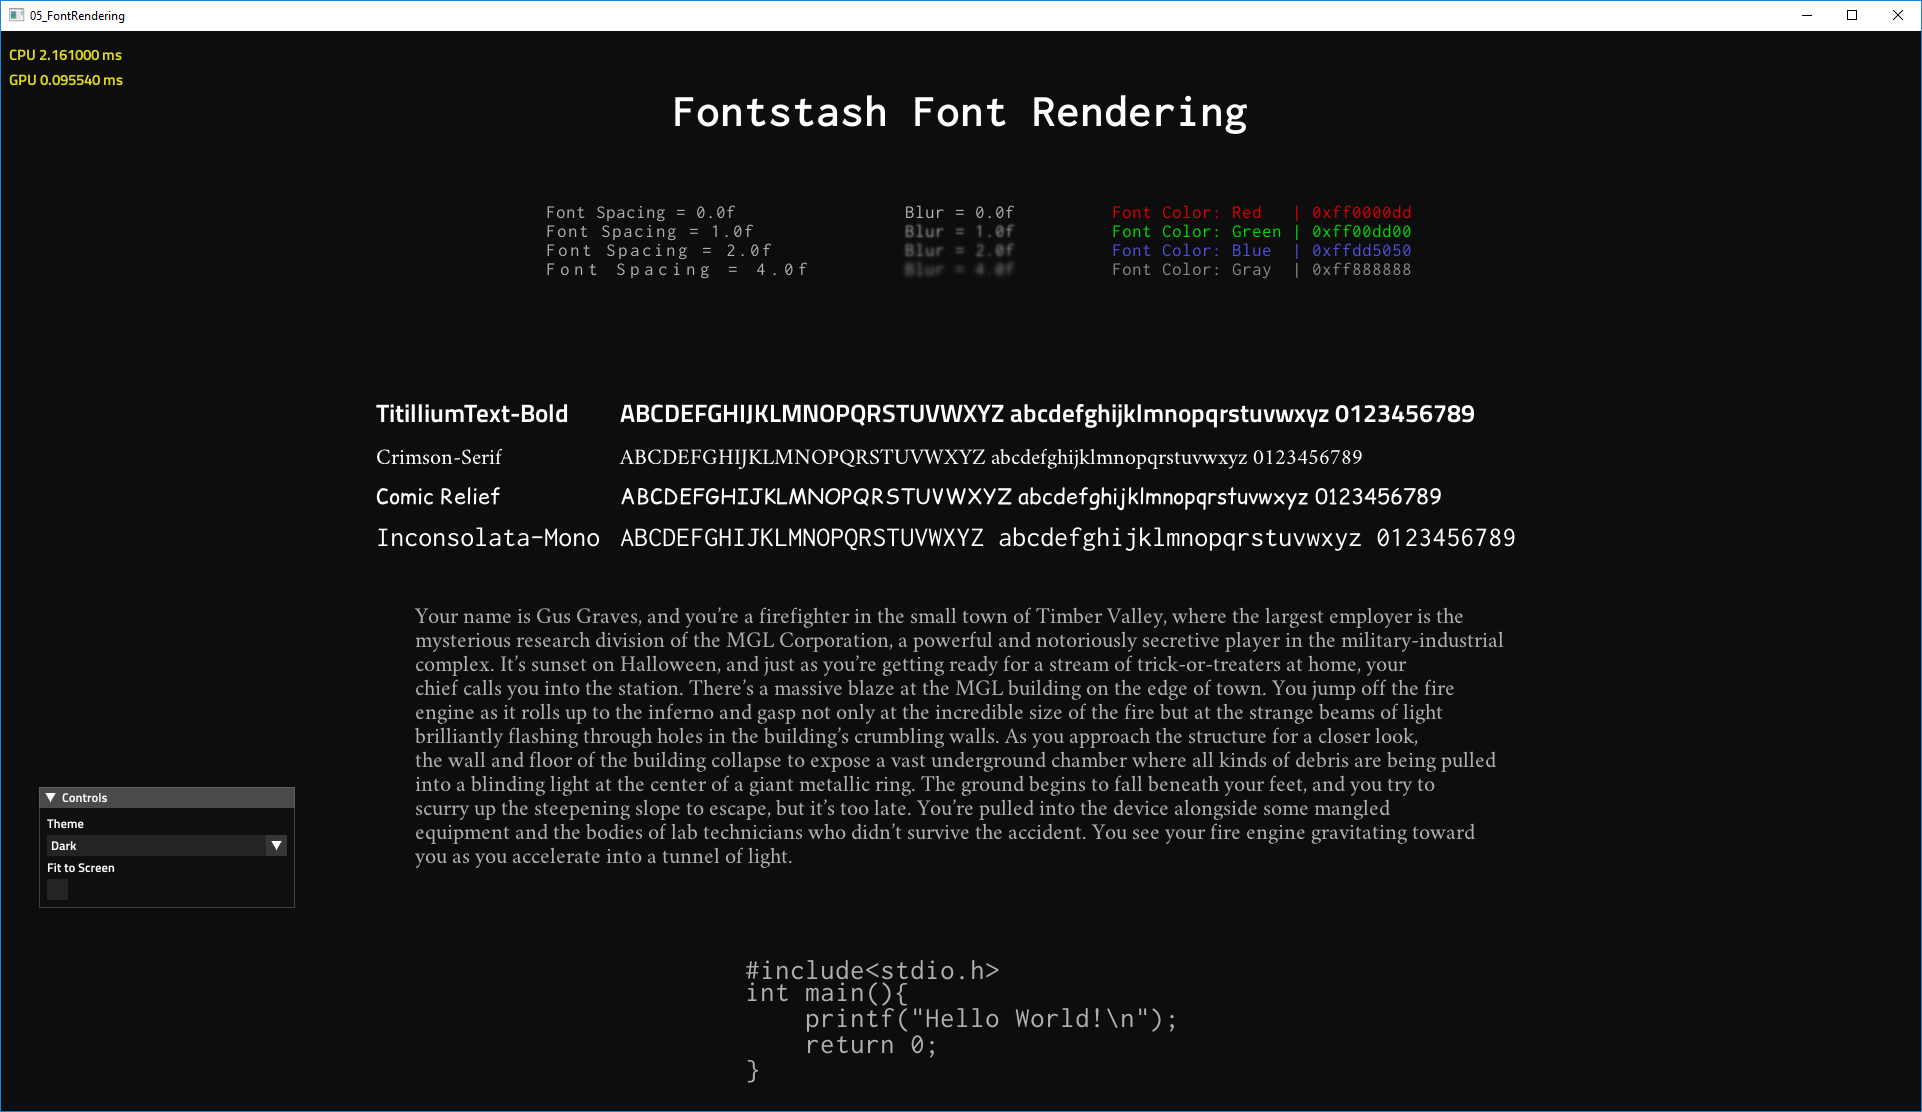 Image of the Font Rendering Unit test